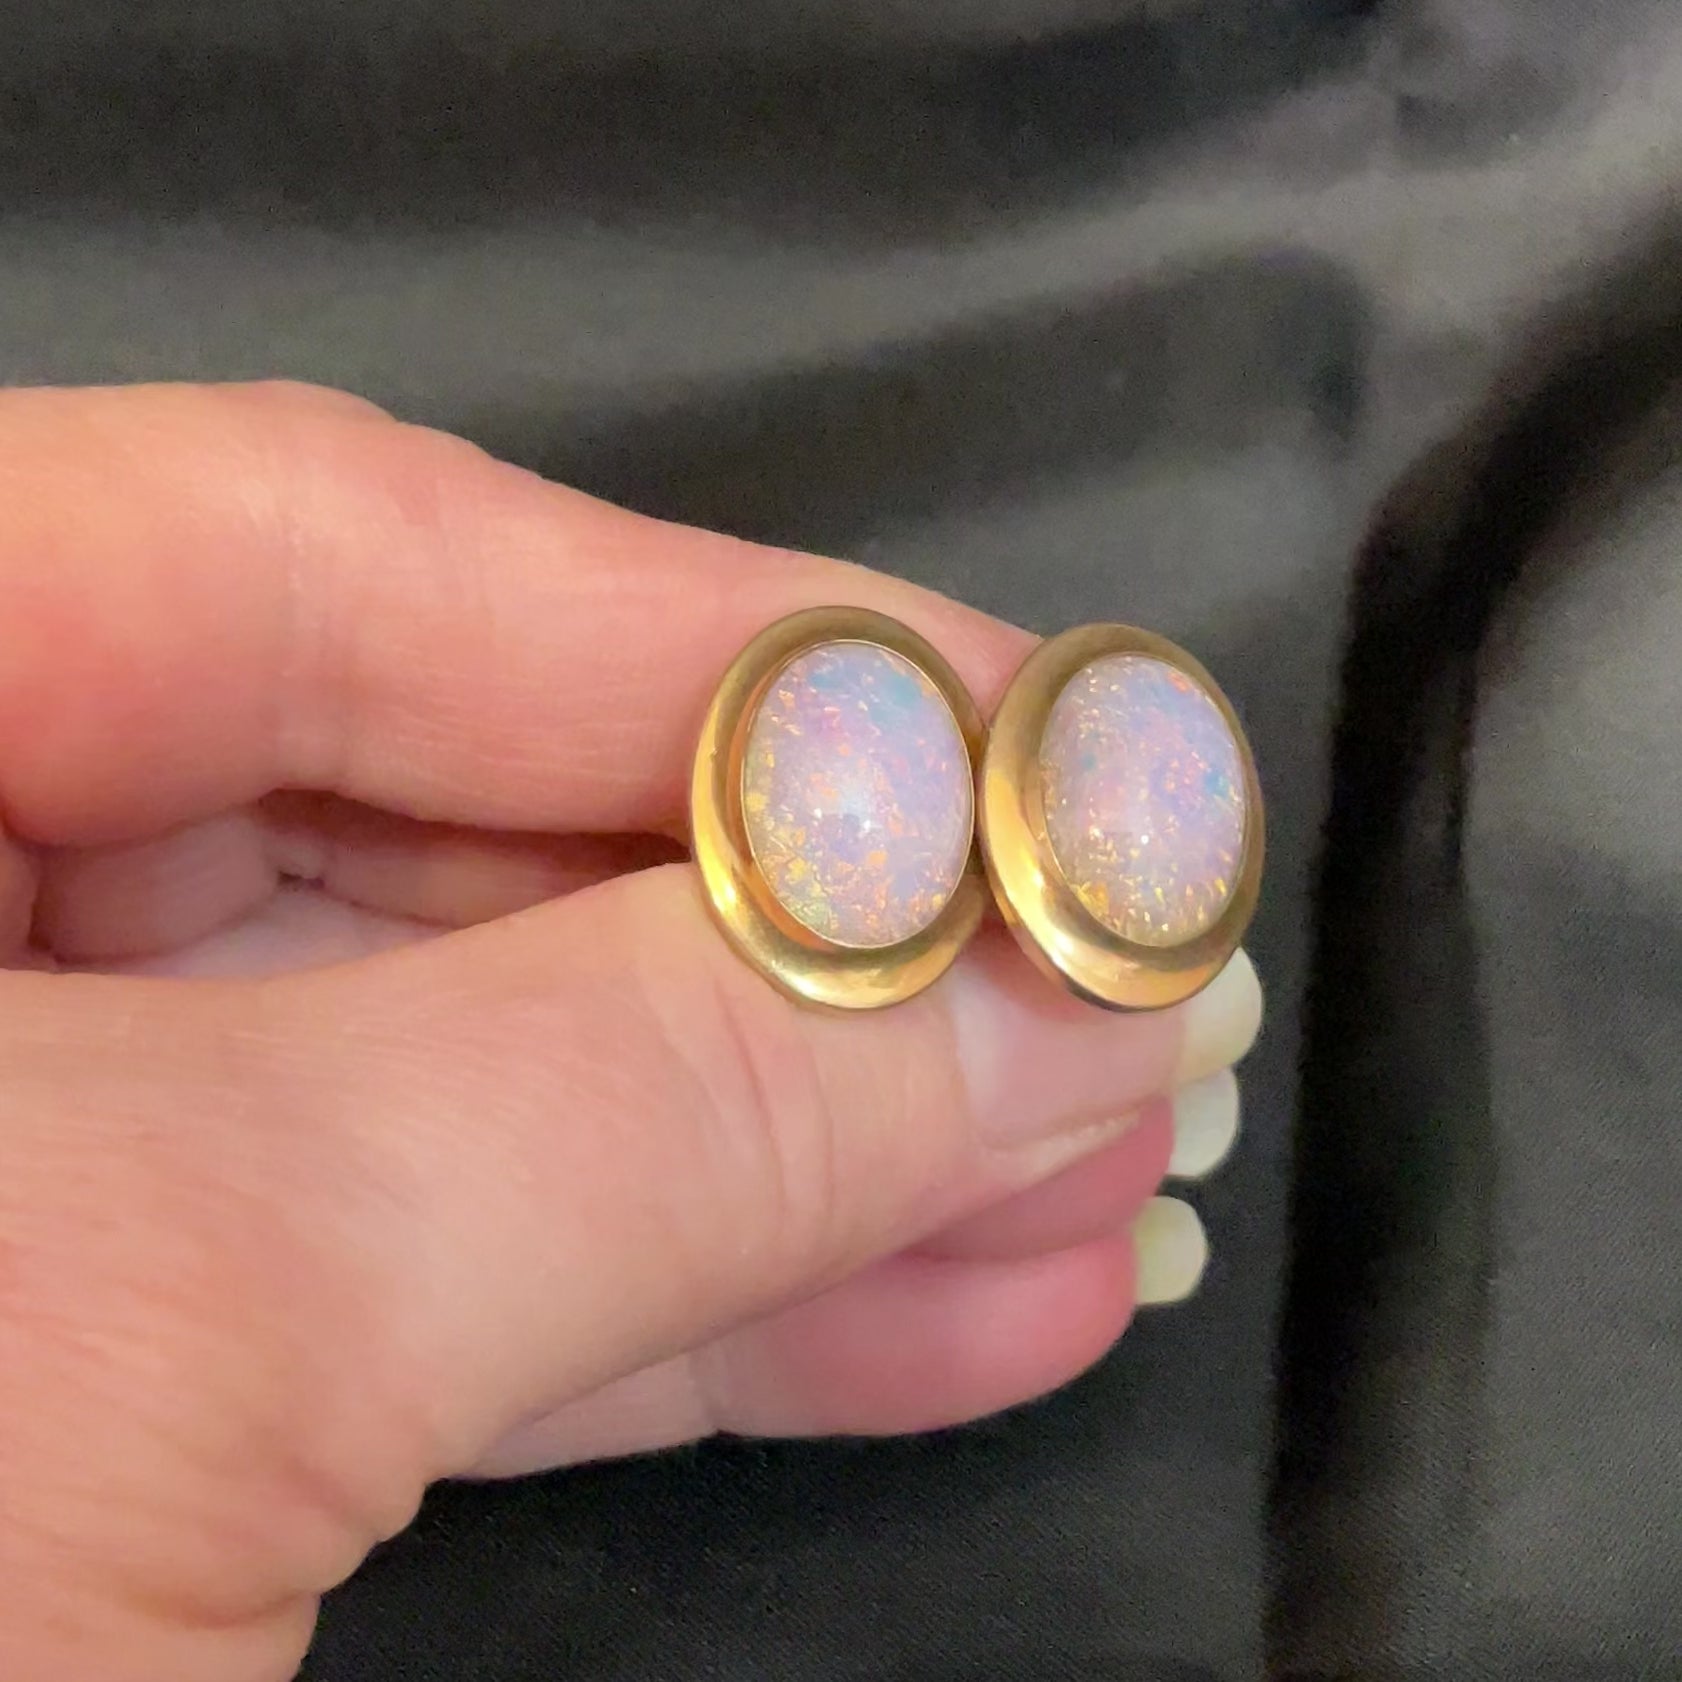 Video of the Correct Quality Mid Century vintage faux opal cufflinks showing the color flash in the light.